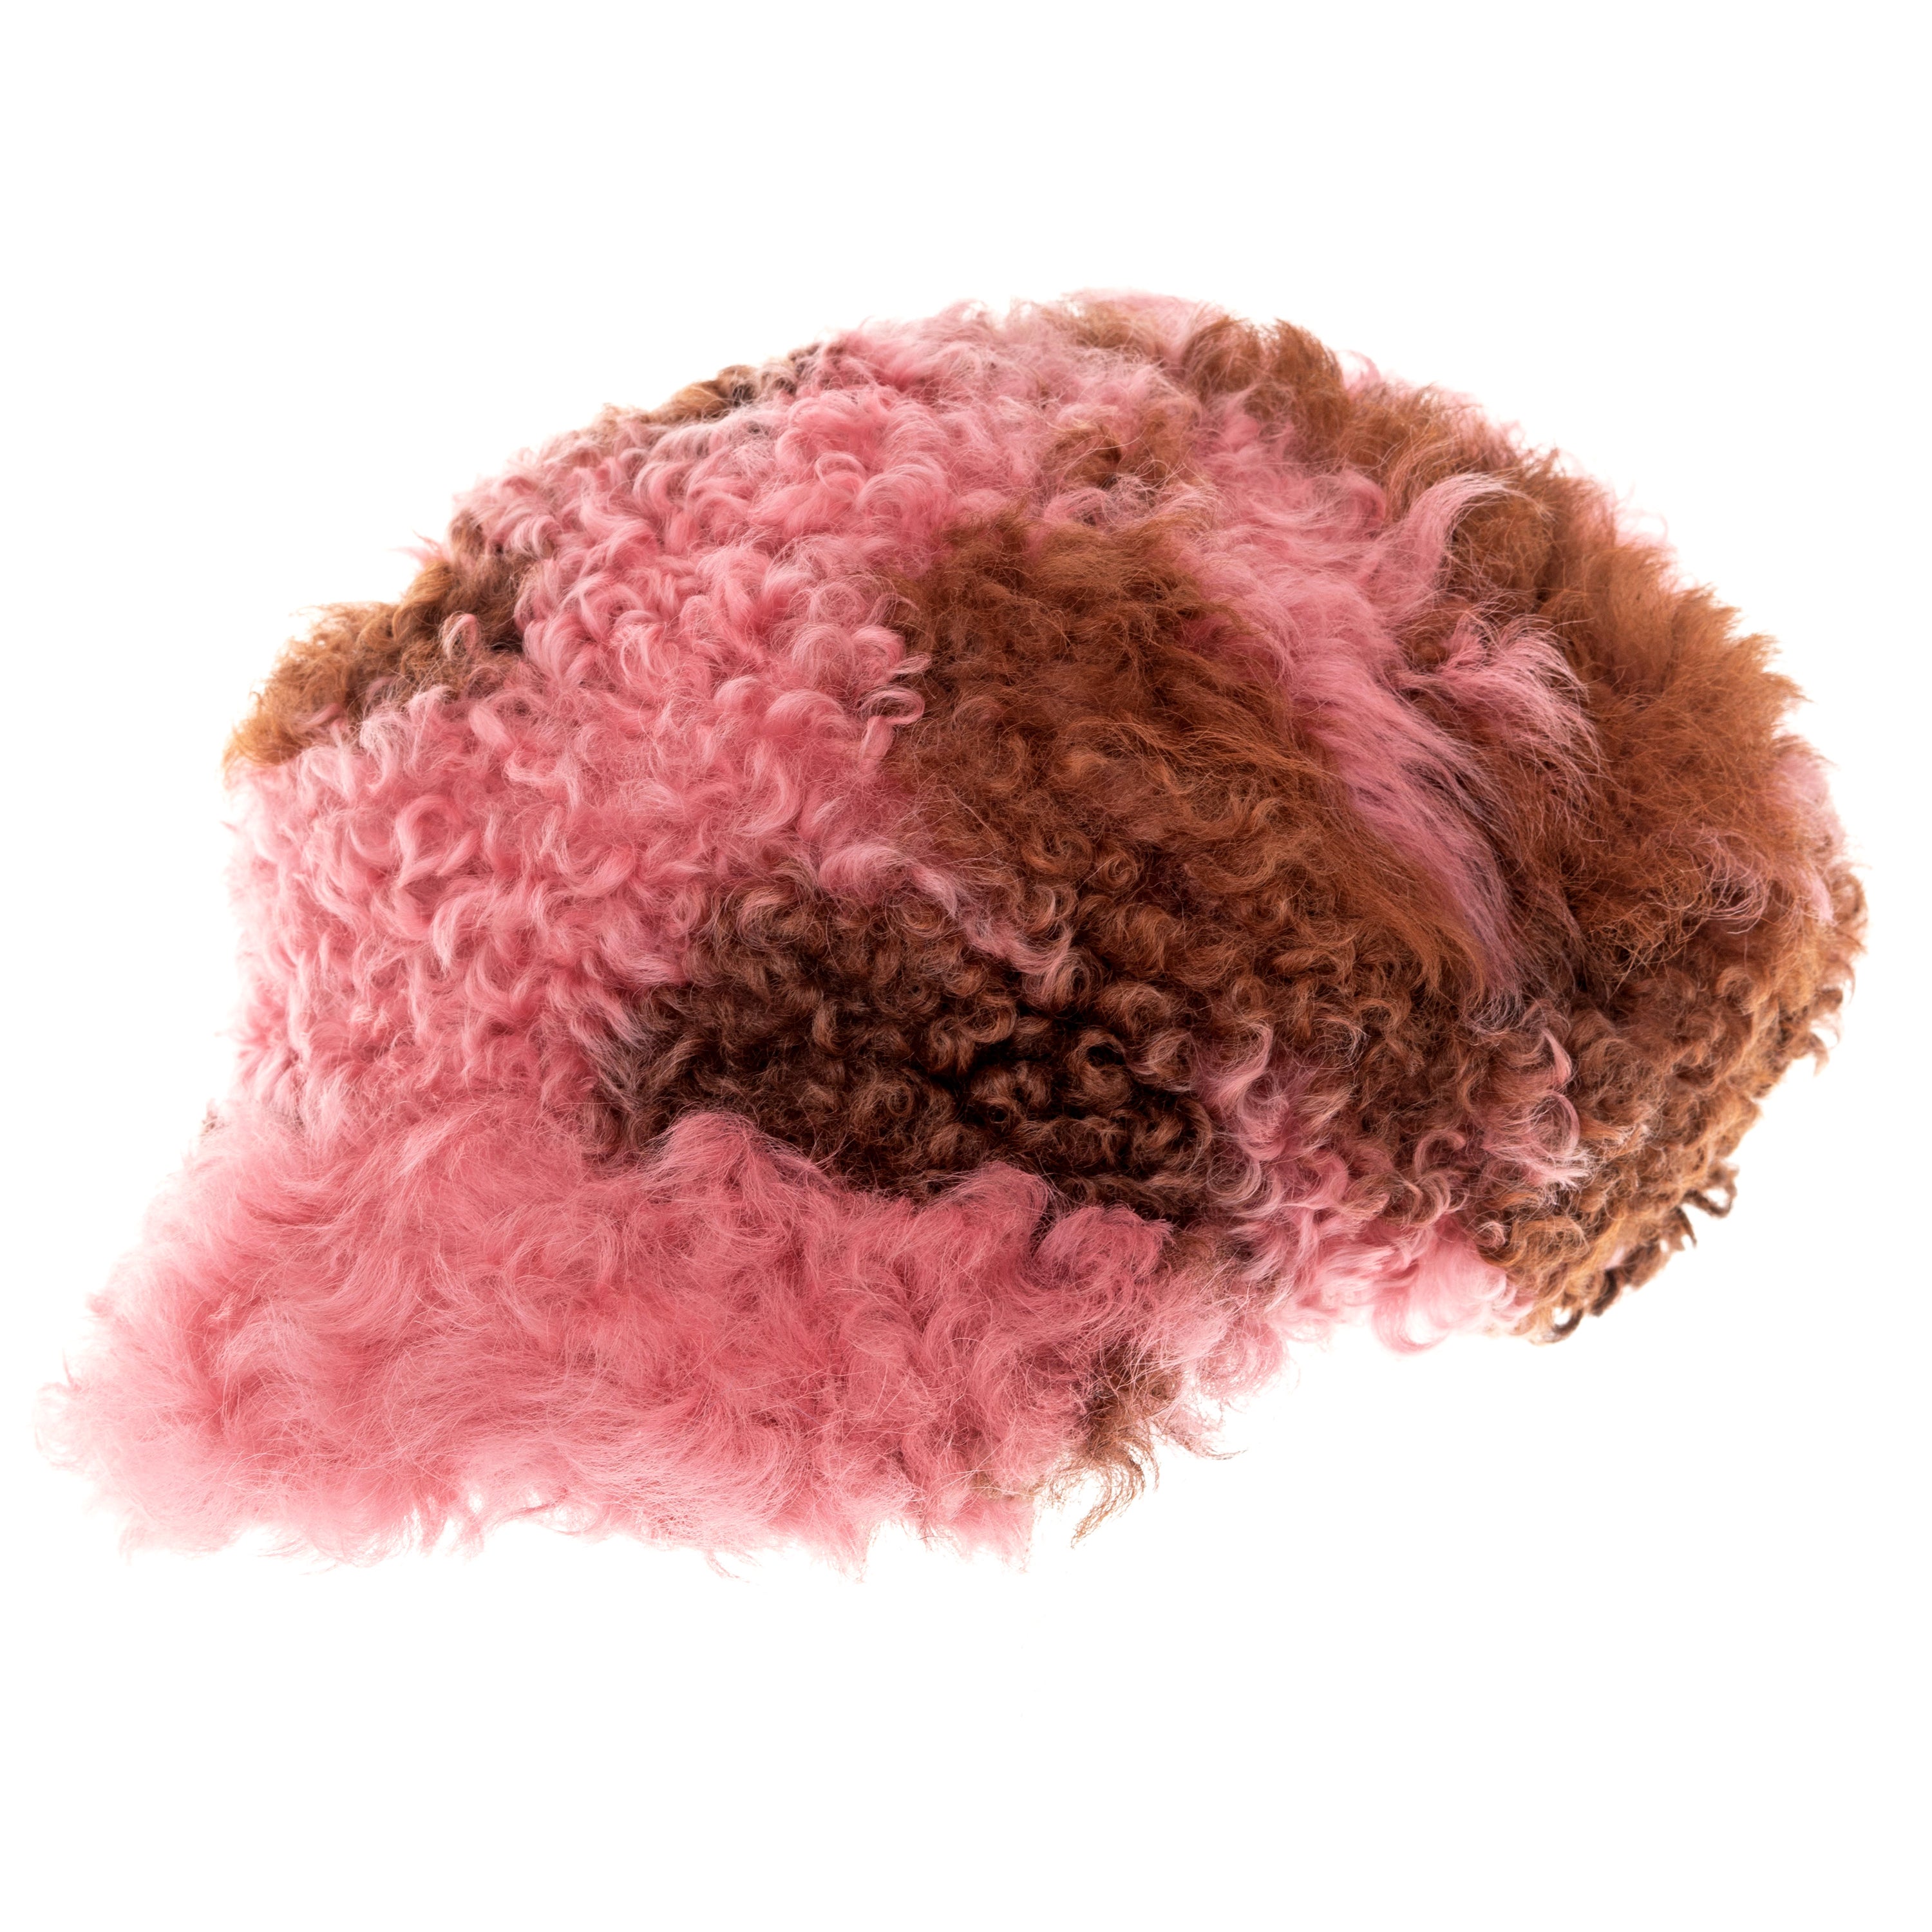 Prada pink and brown curly shearling 'newsboy' hat, fw 2017